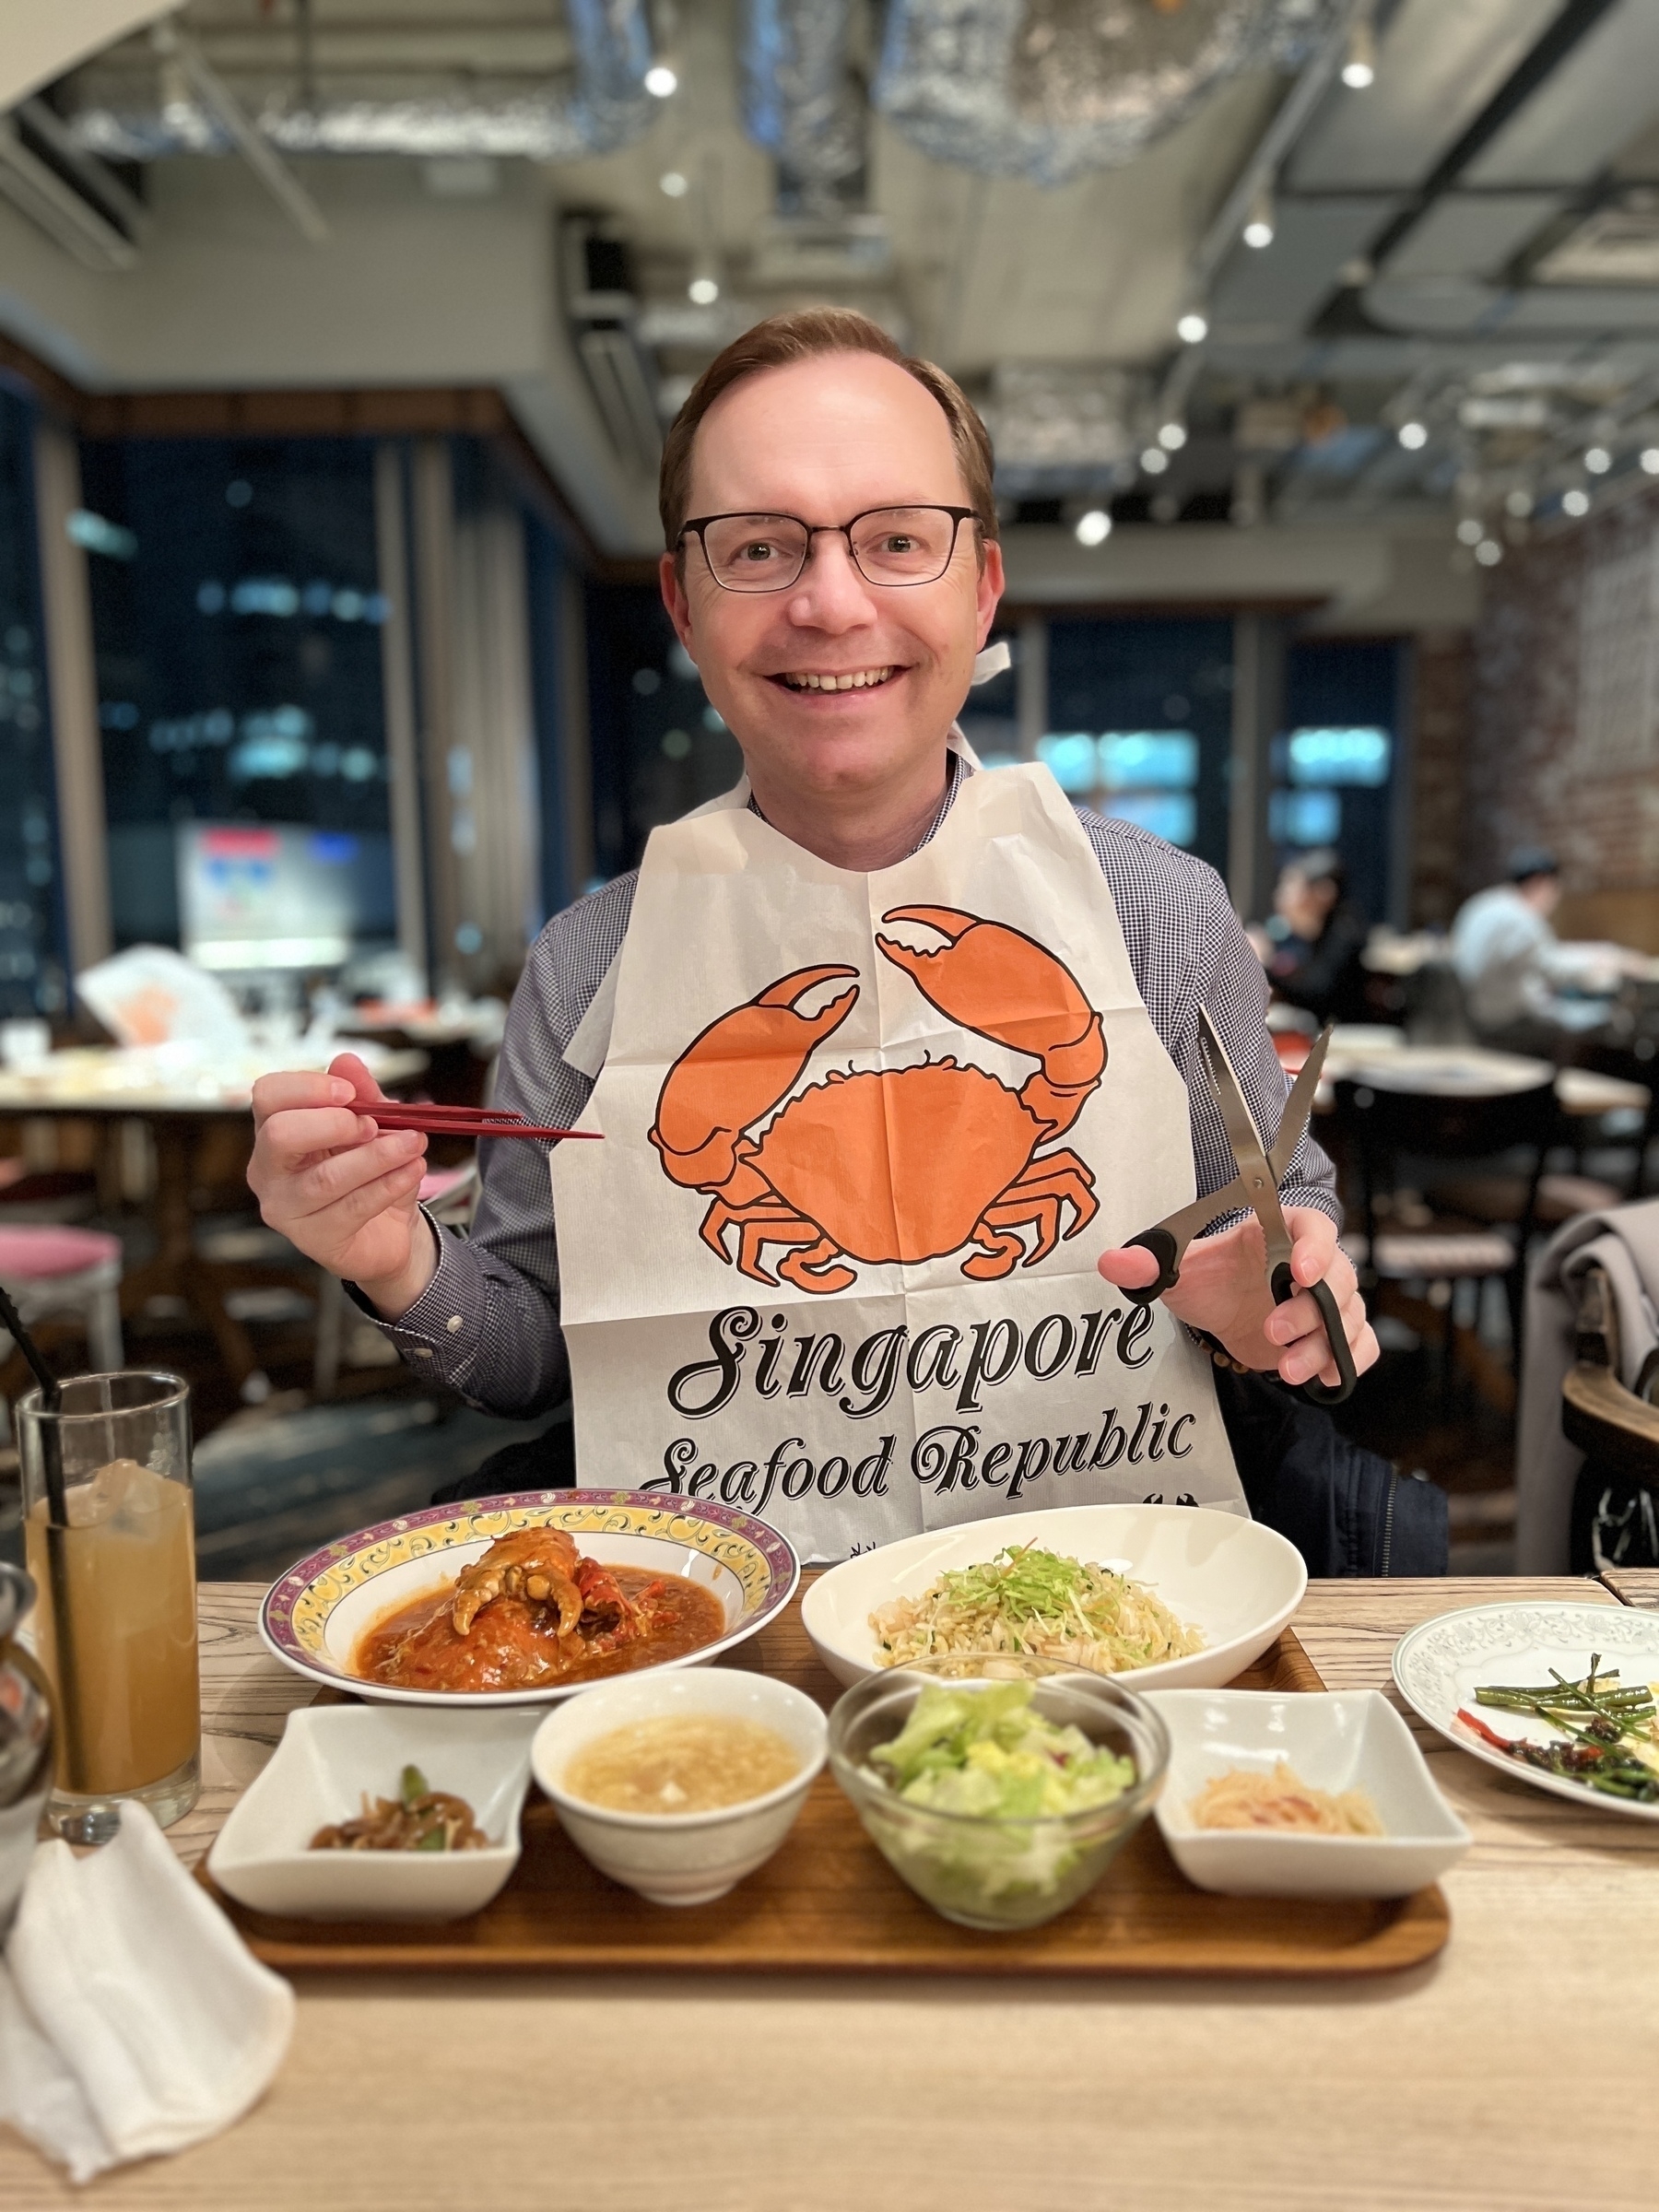 Chad in a restaurant with a plate full of food in front of him wearing a paper bib with the logo for “Singapore Seafood Republic” brandishing chopsticks and a pair of scissors and looking like a happy psycho